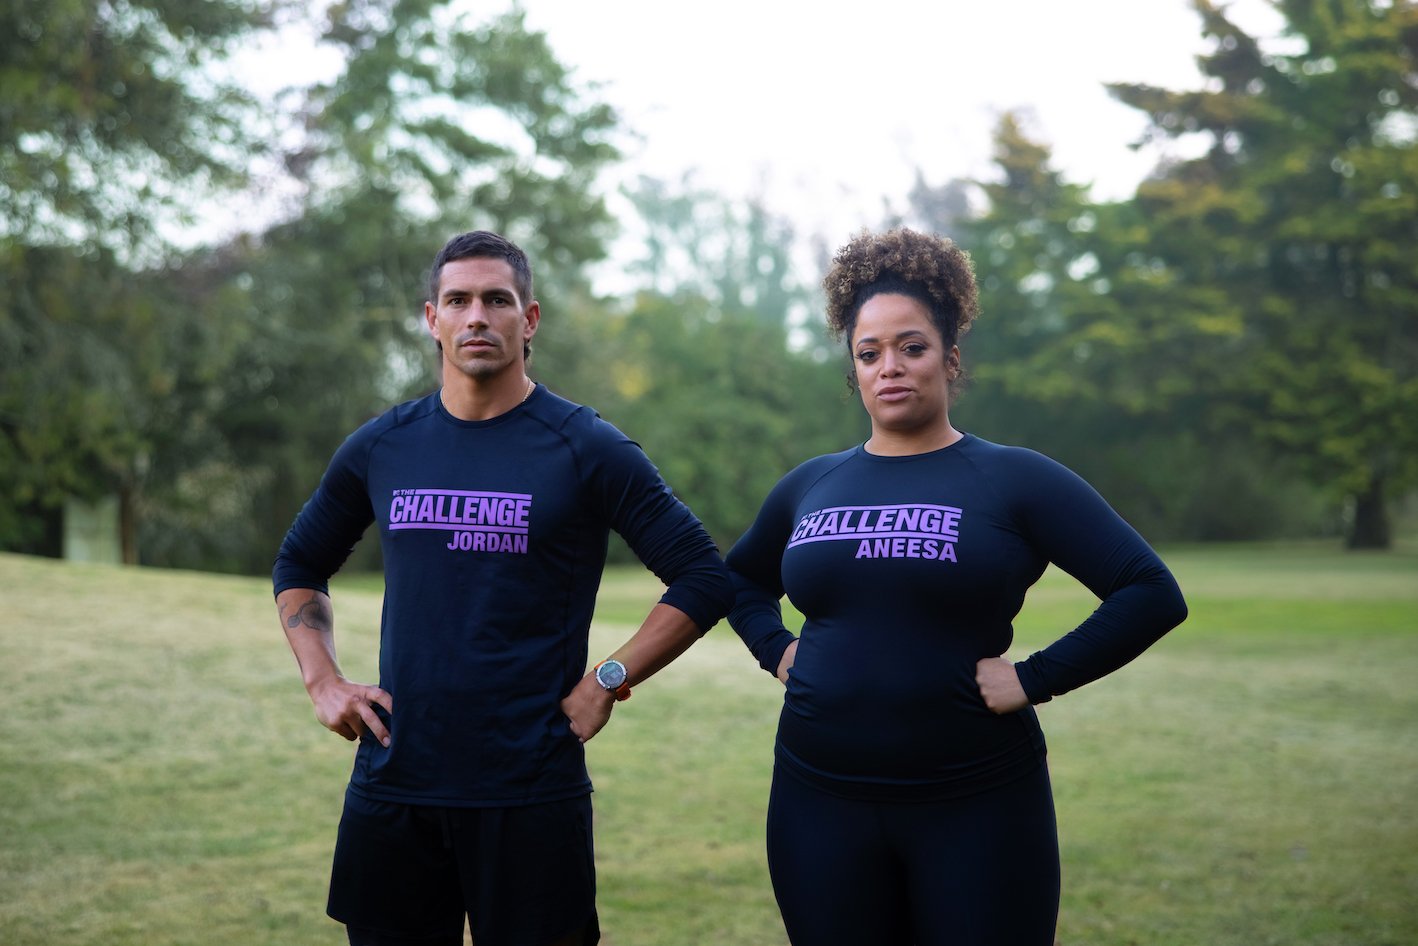 Jordan Wiseley and Aneesa Ferreira standing in their uniforms with their hands on their hips for 'The Challenge' Season 38